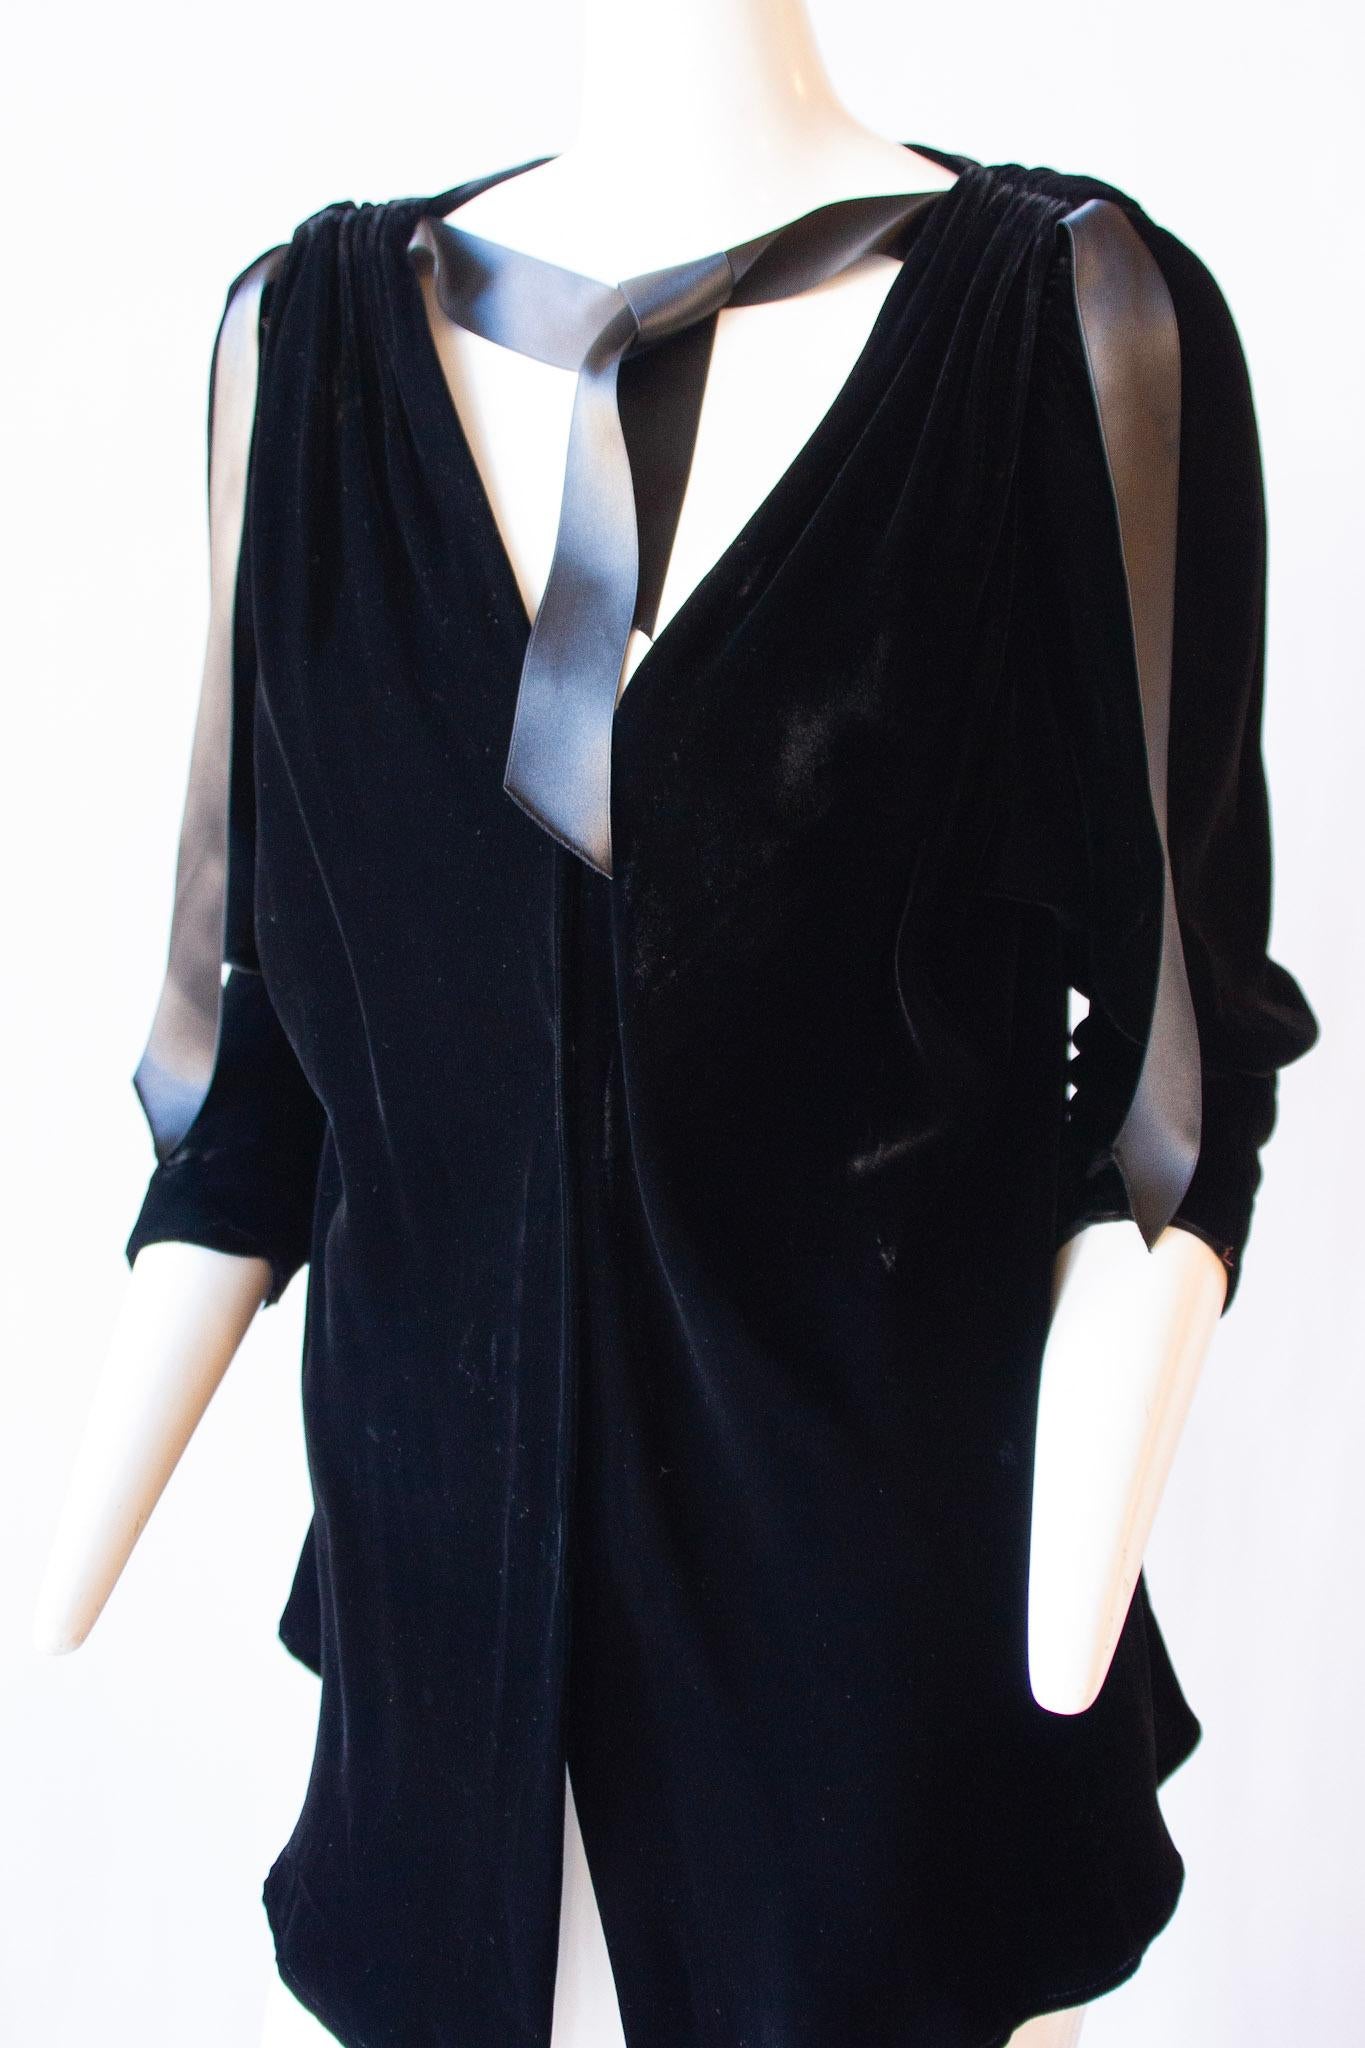 Yves Saint Laurent rive gauche, black velvet capelet with ribbon ties and snap front closure

30